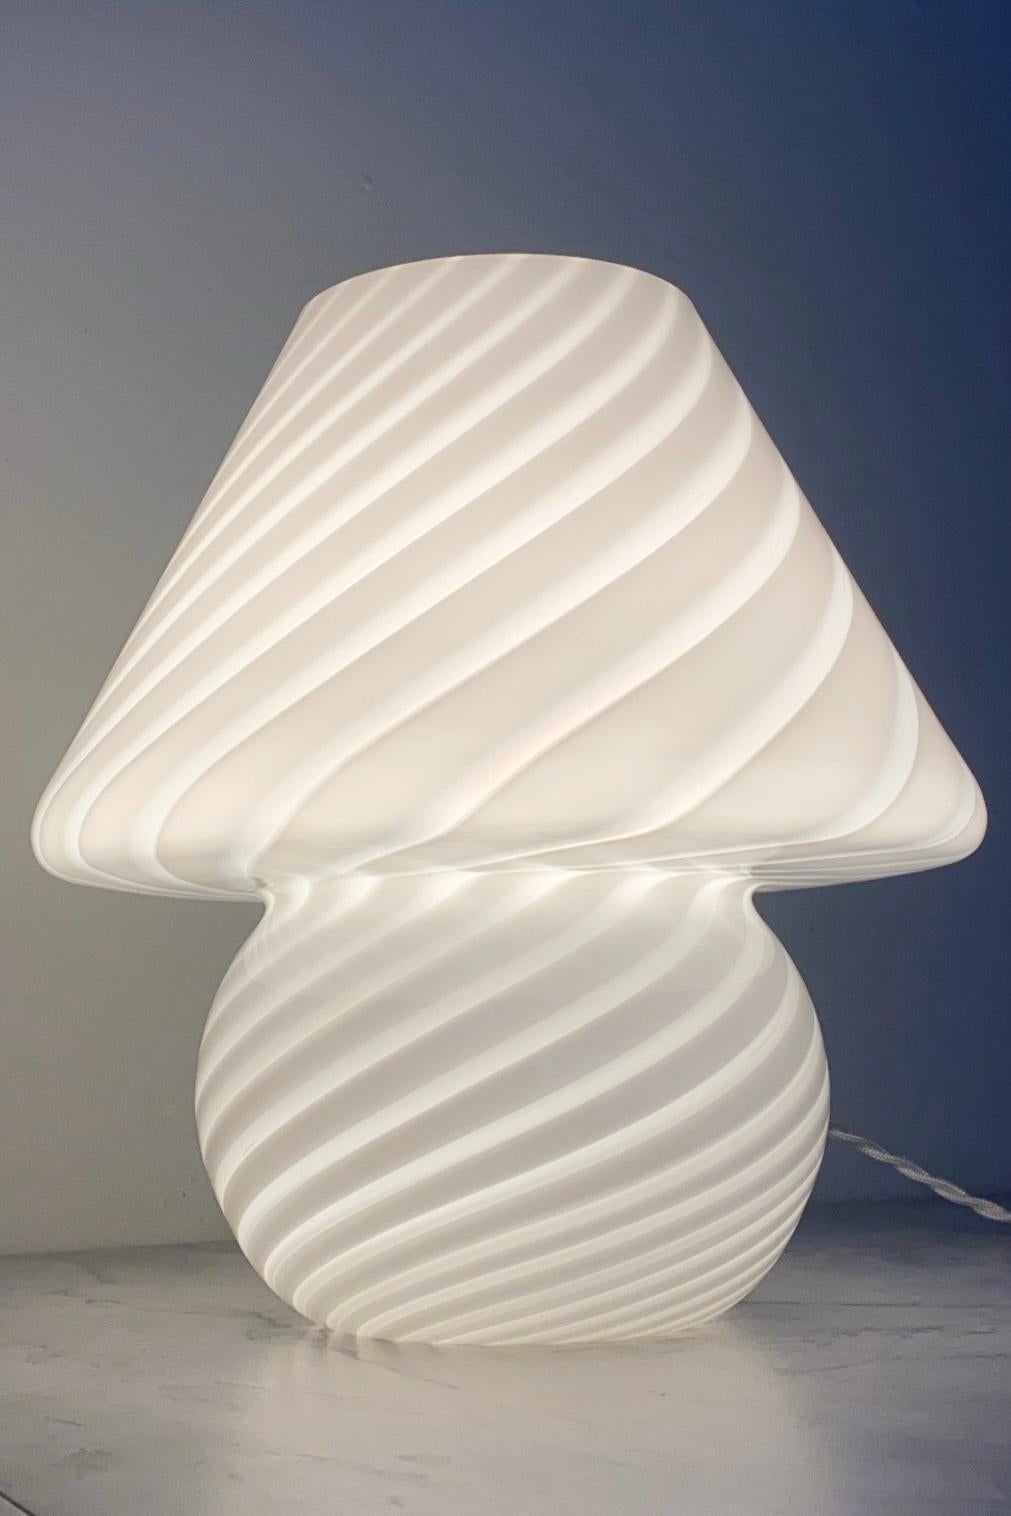 Vintage medium Murano mushroom table lamp in white opaline glass. Mouth blown in one piece of glass with a swirl pattern. Handmade in Italy, 1960s/70s, and comes with new white cord. ⁠H: 26 cm D: 24 cm⁠
